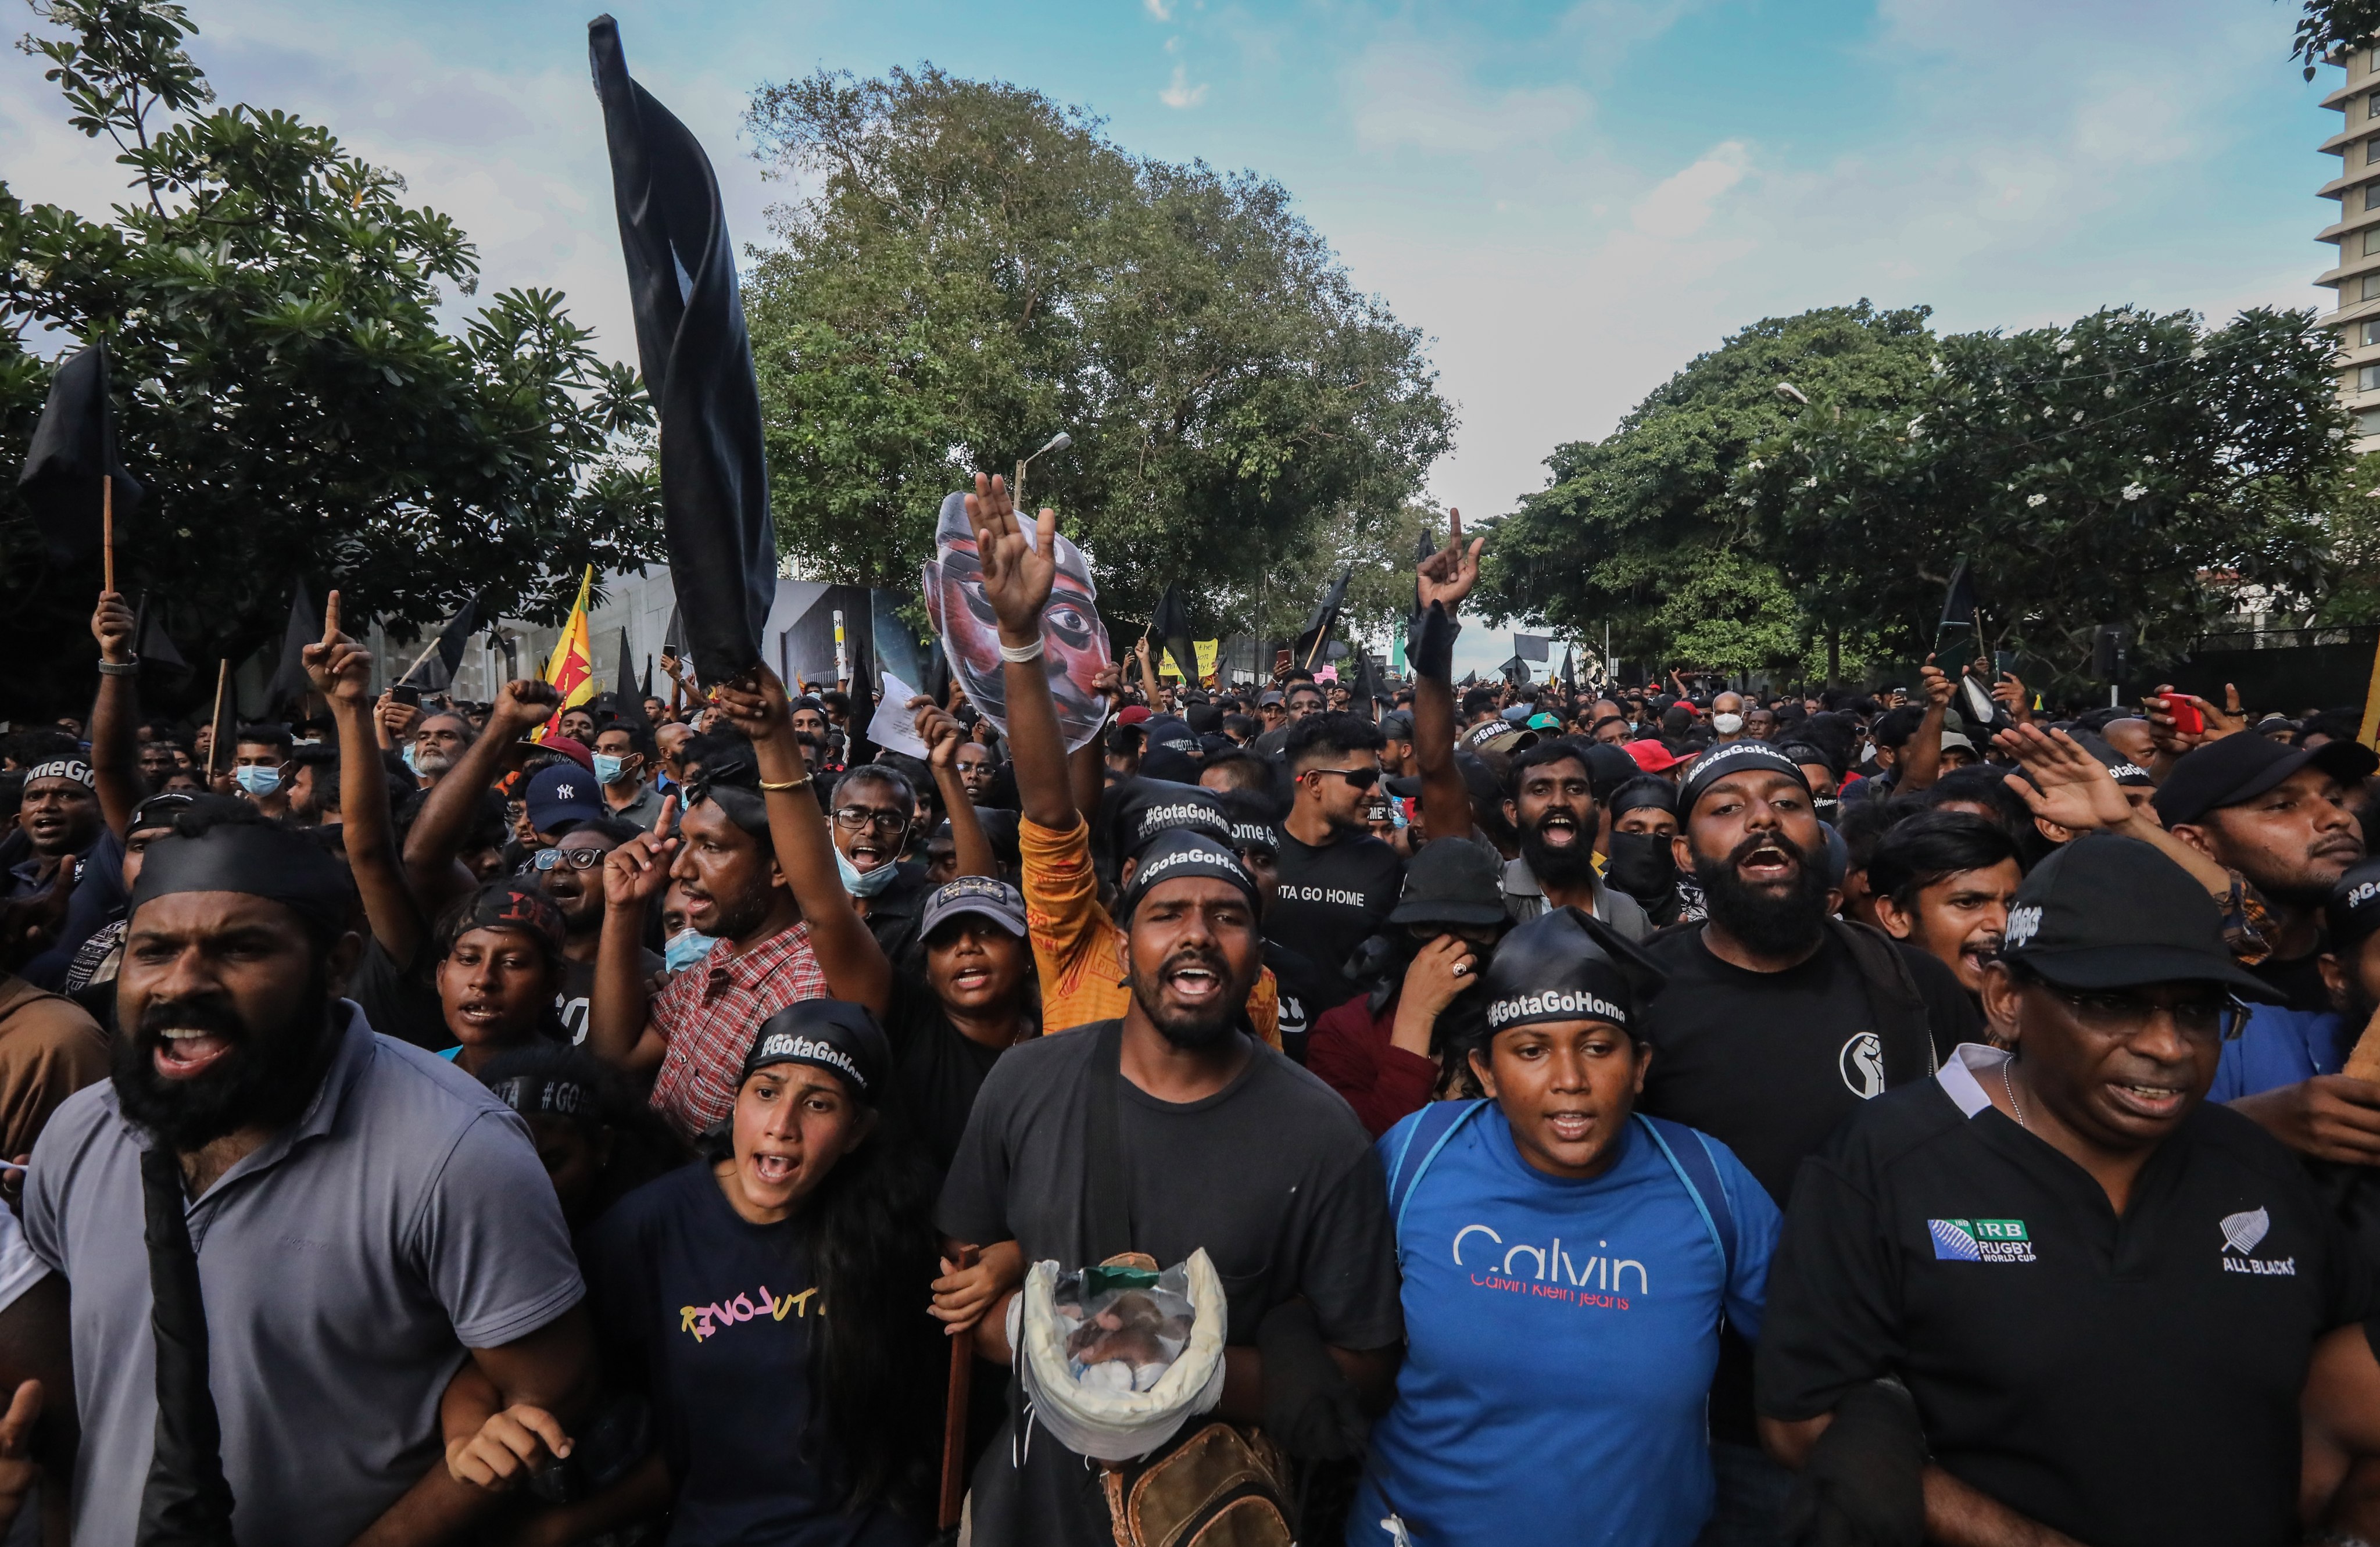 Protesters in Colombo, Sri Lanka shout slogans on Saturday during an anti-government protest about the nation’s worst ever economic crisis. Photo: EPA-EFE